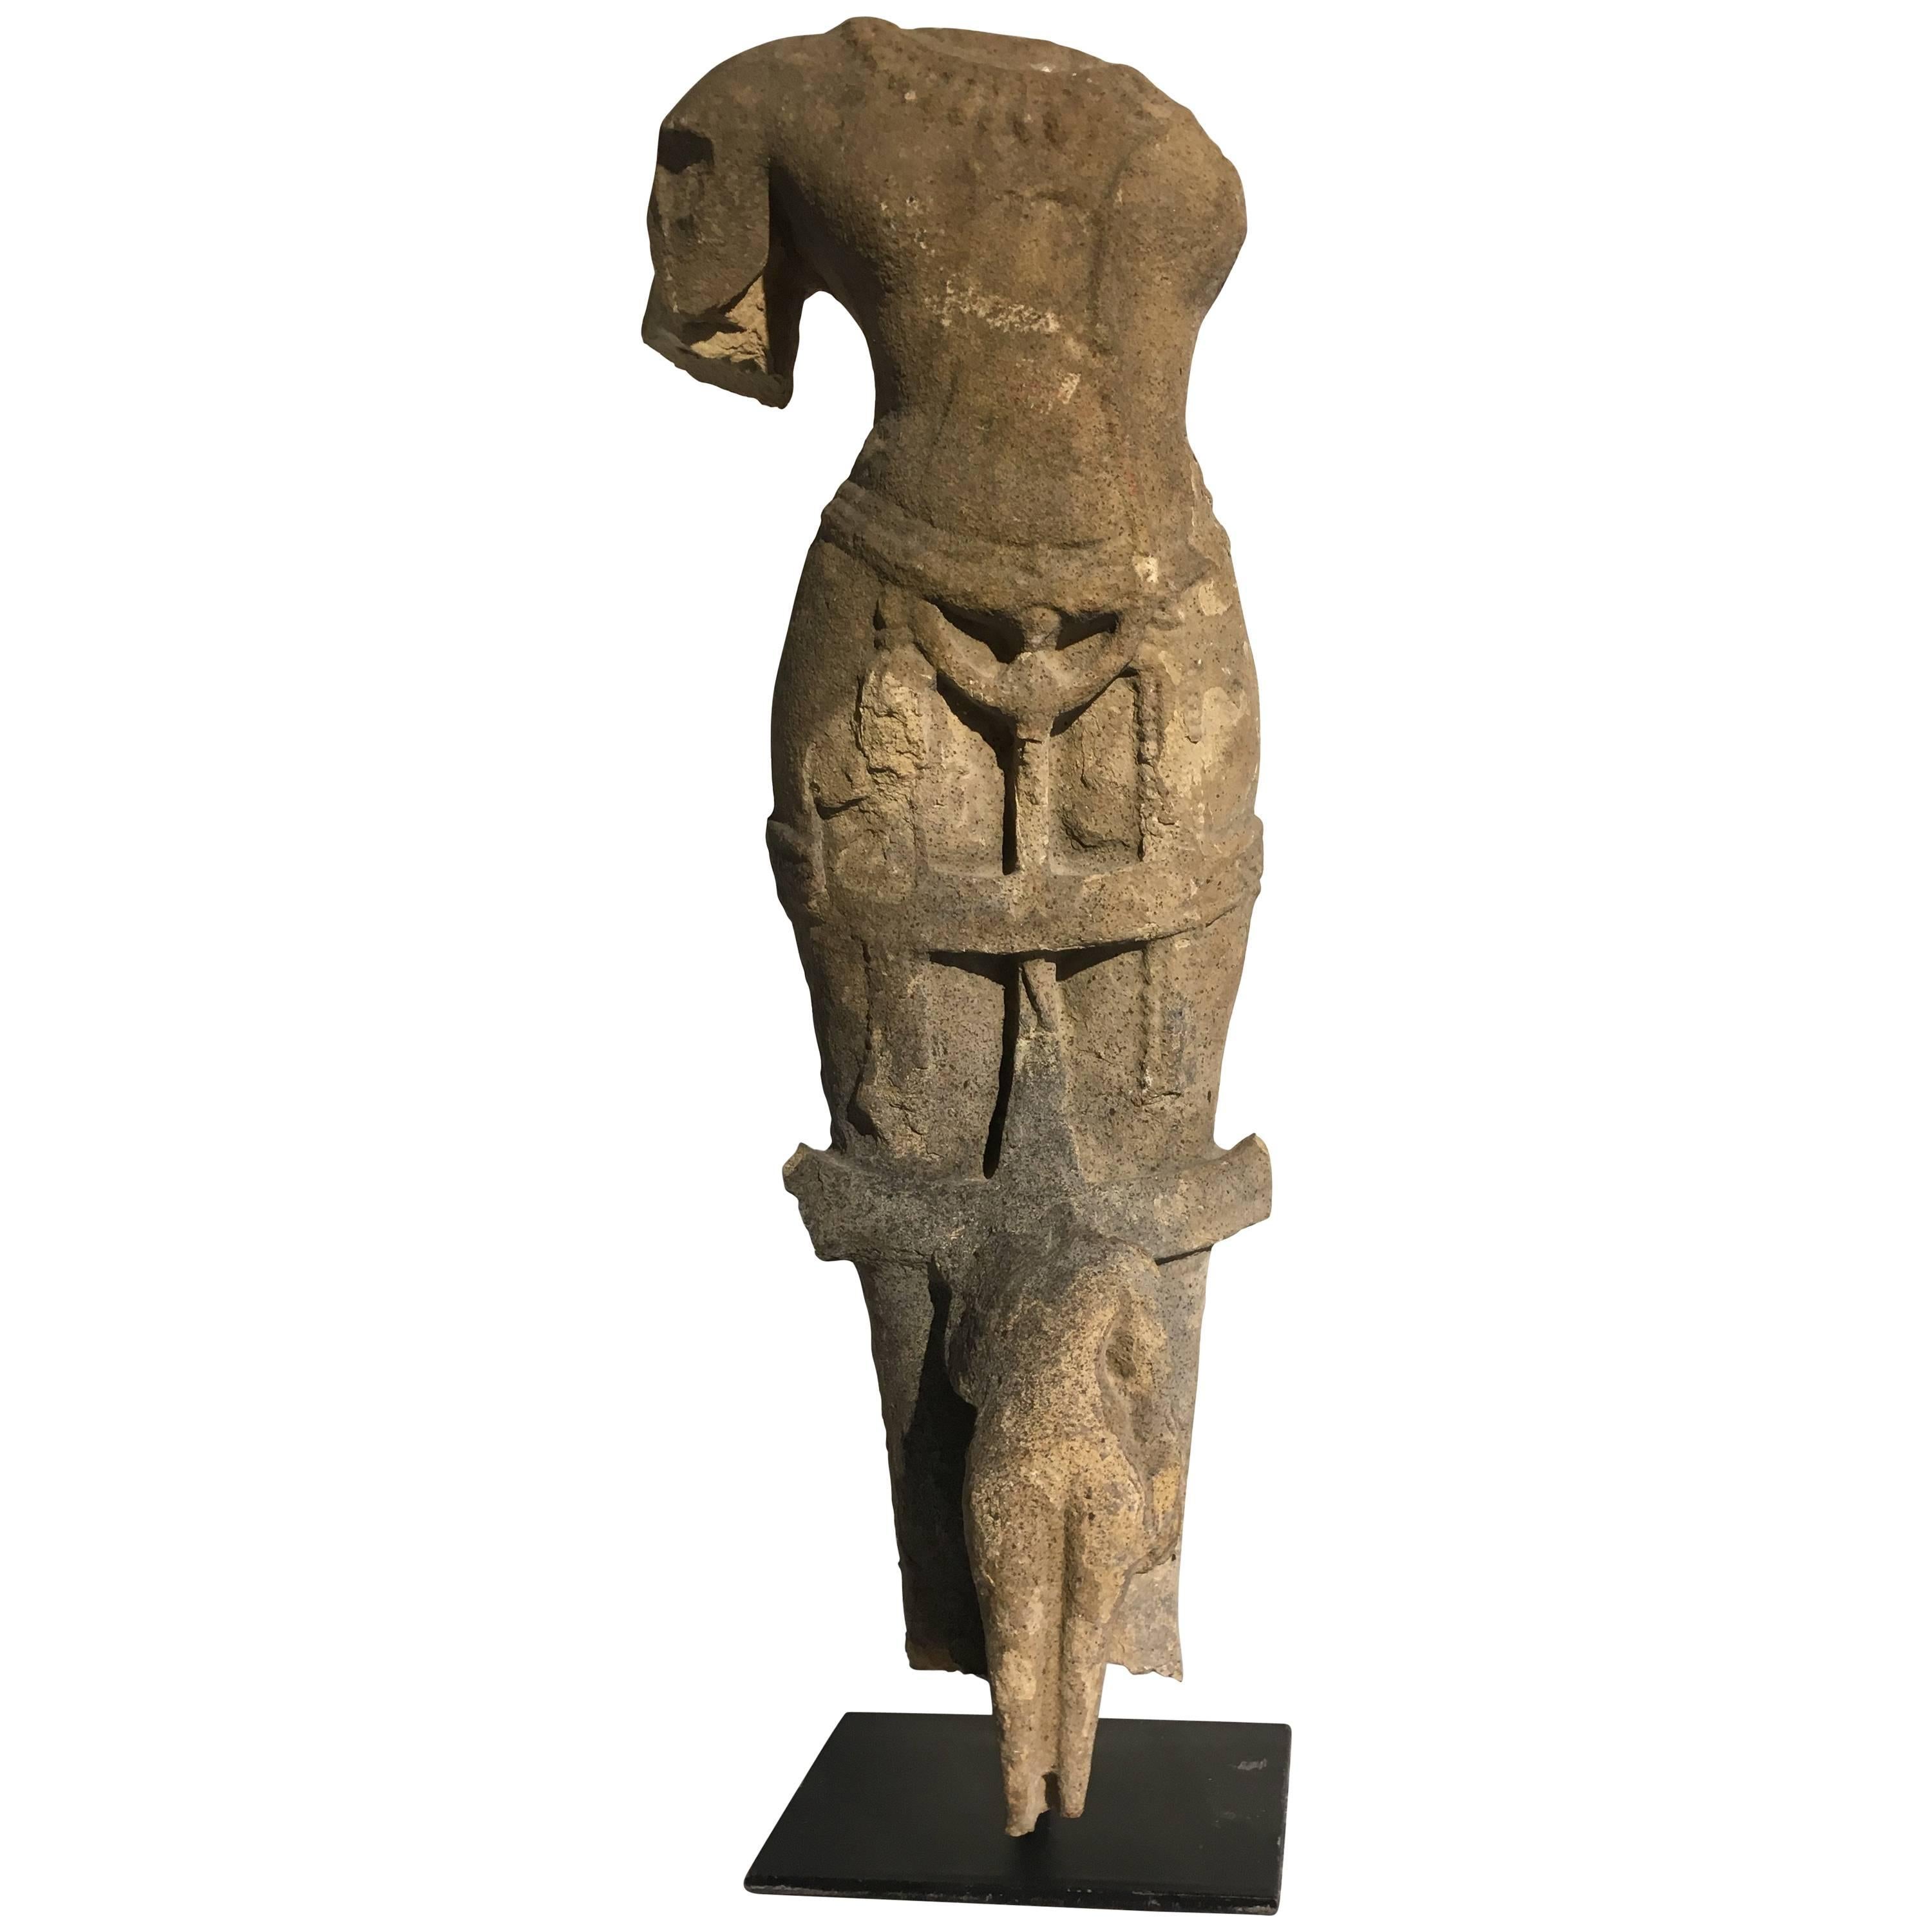 Indian Sandstone Torso of a Male Deity, Medieval Period, 9th-12th Century